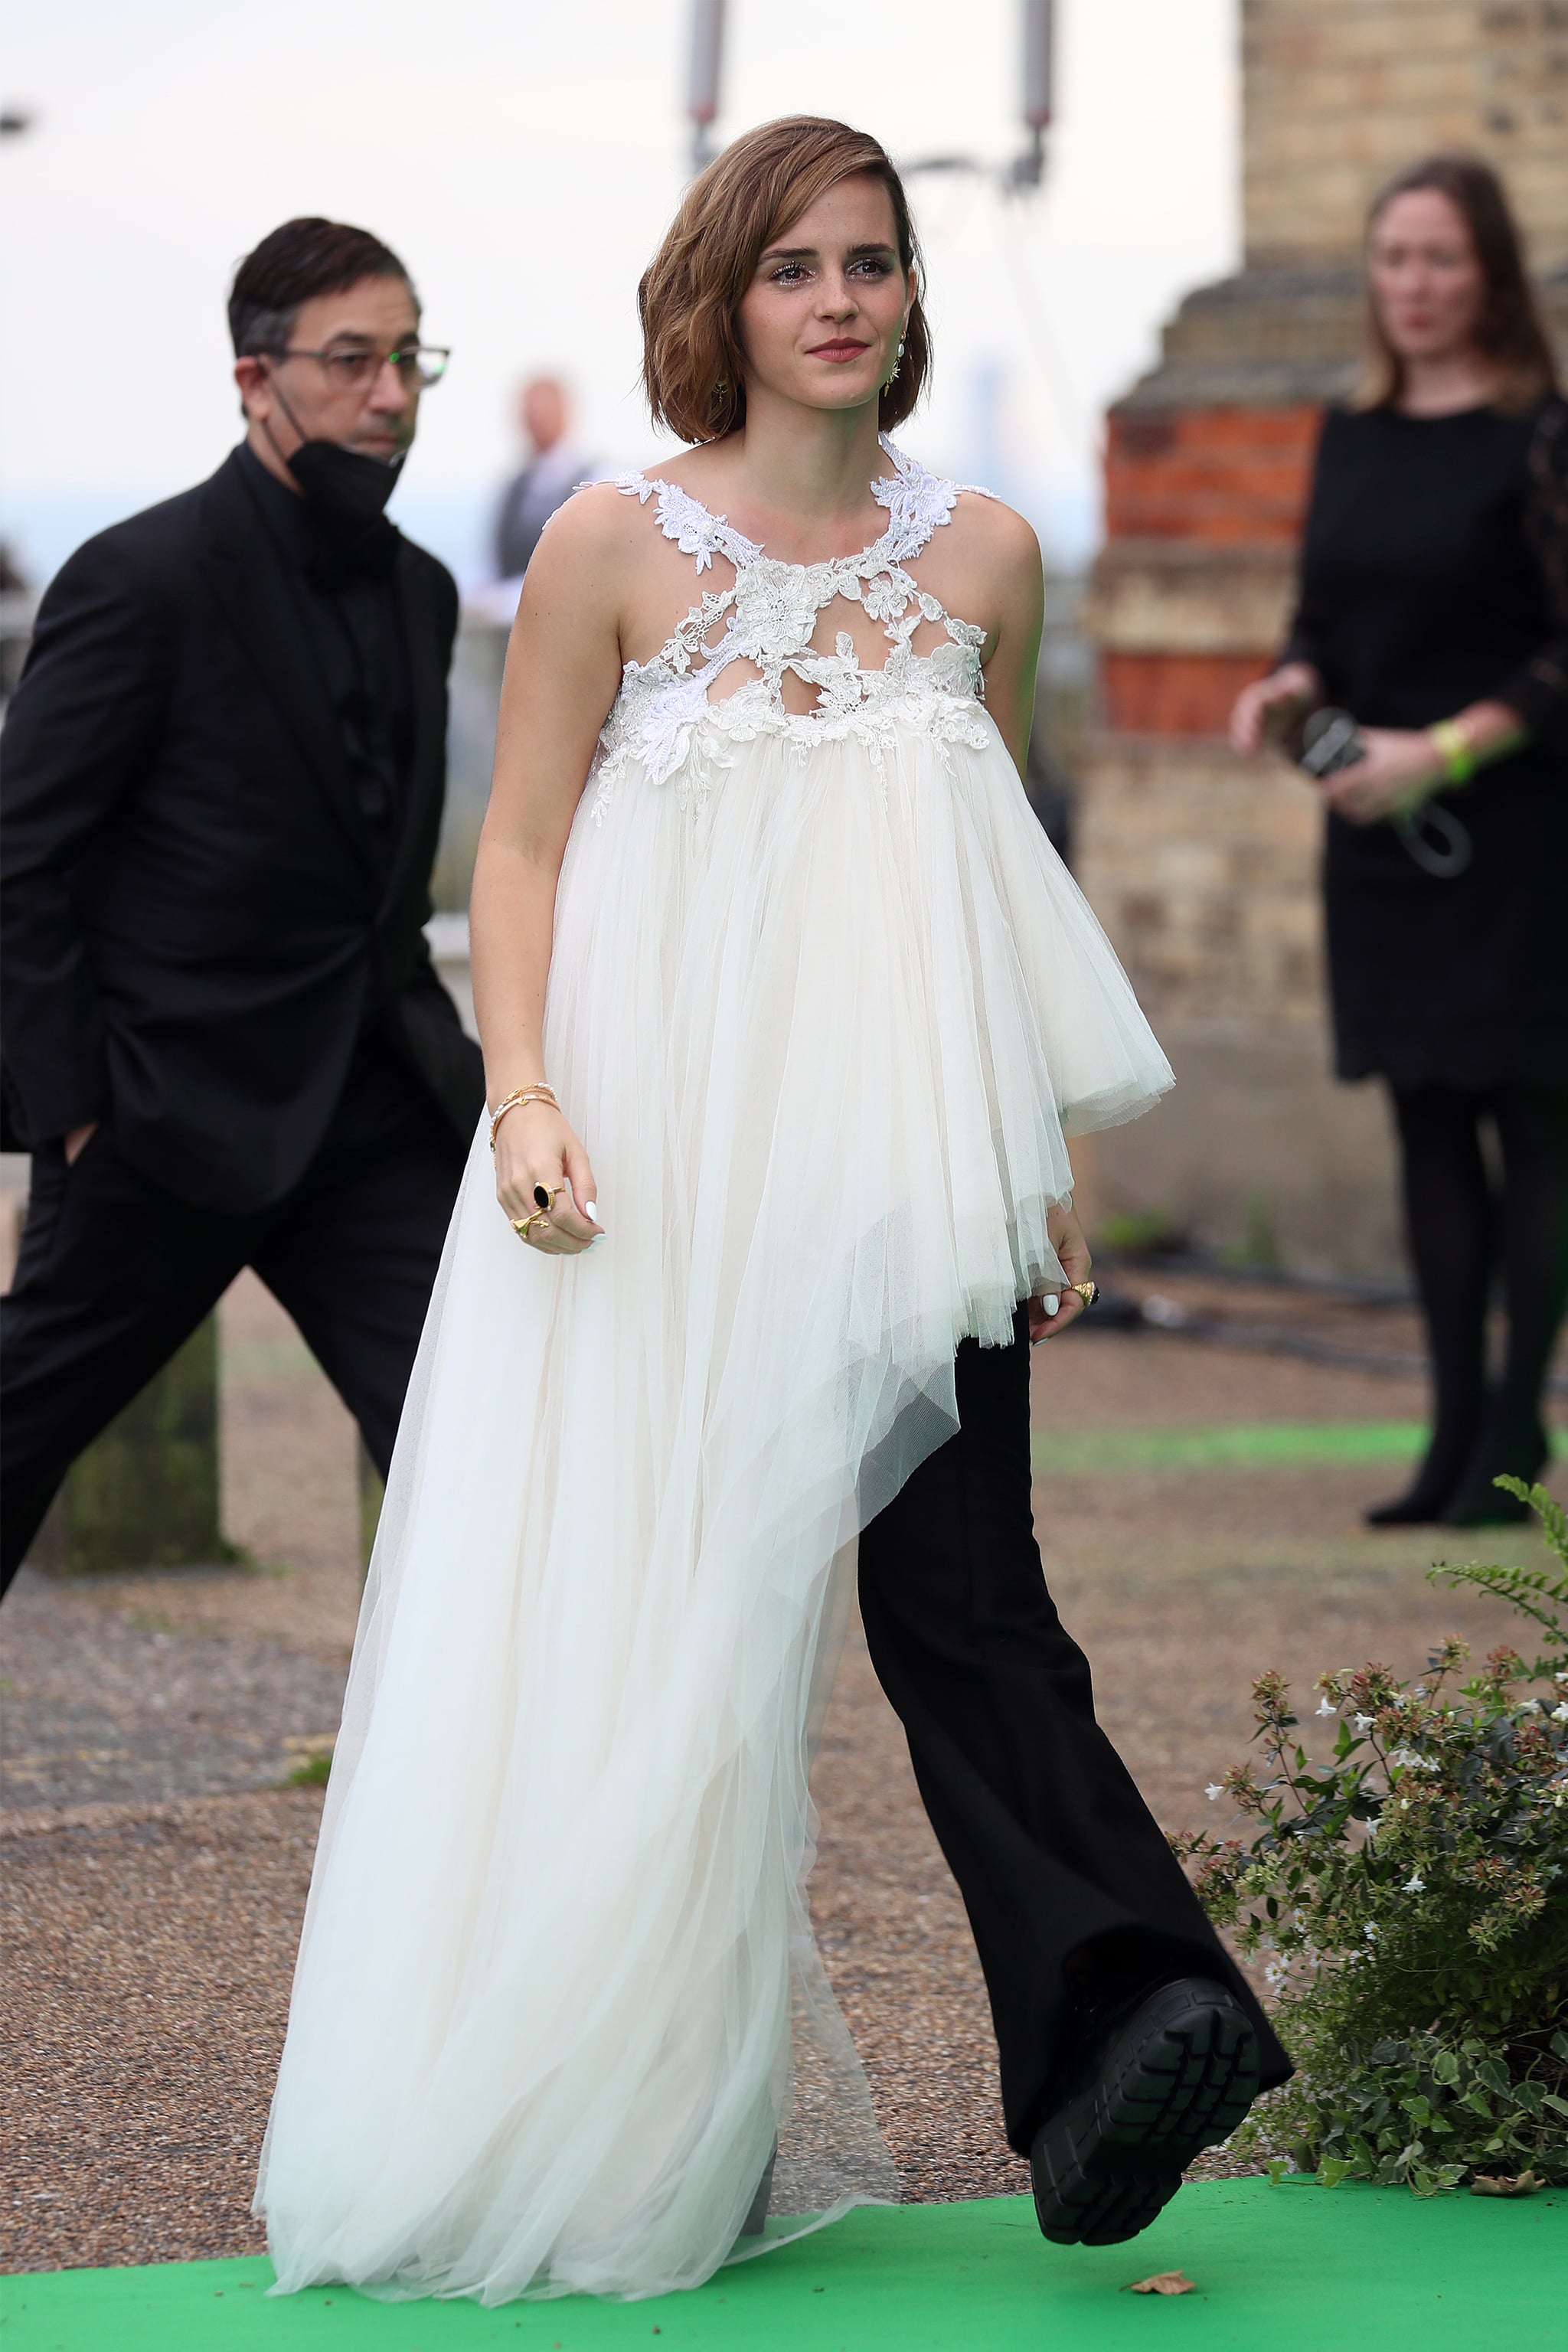 Emma Watson wears gown made from recycled wedding dresses